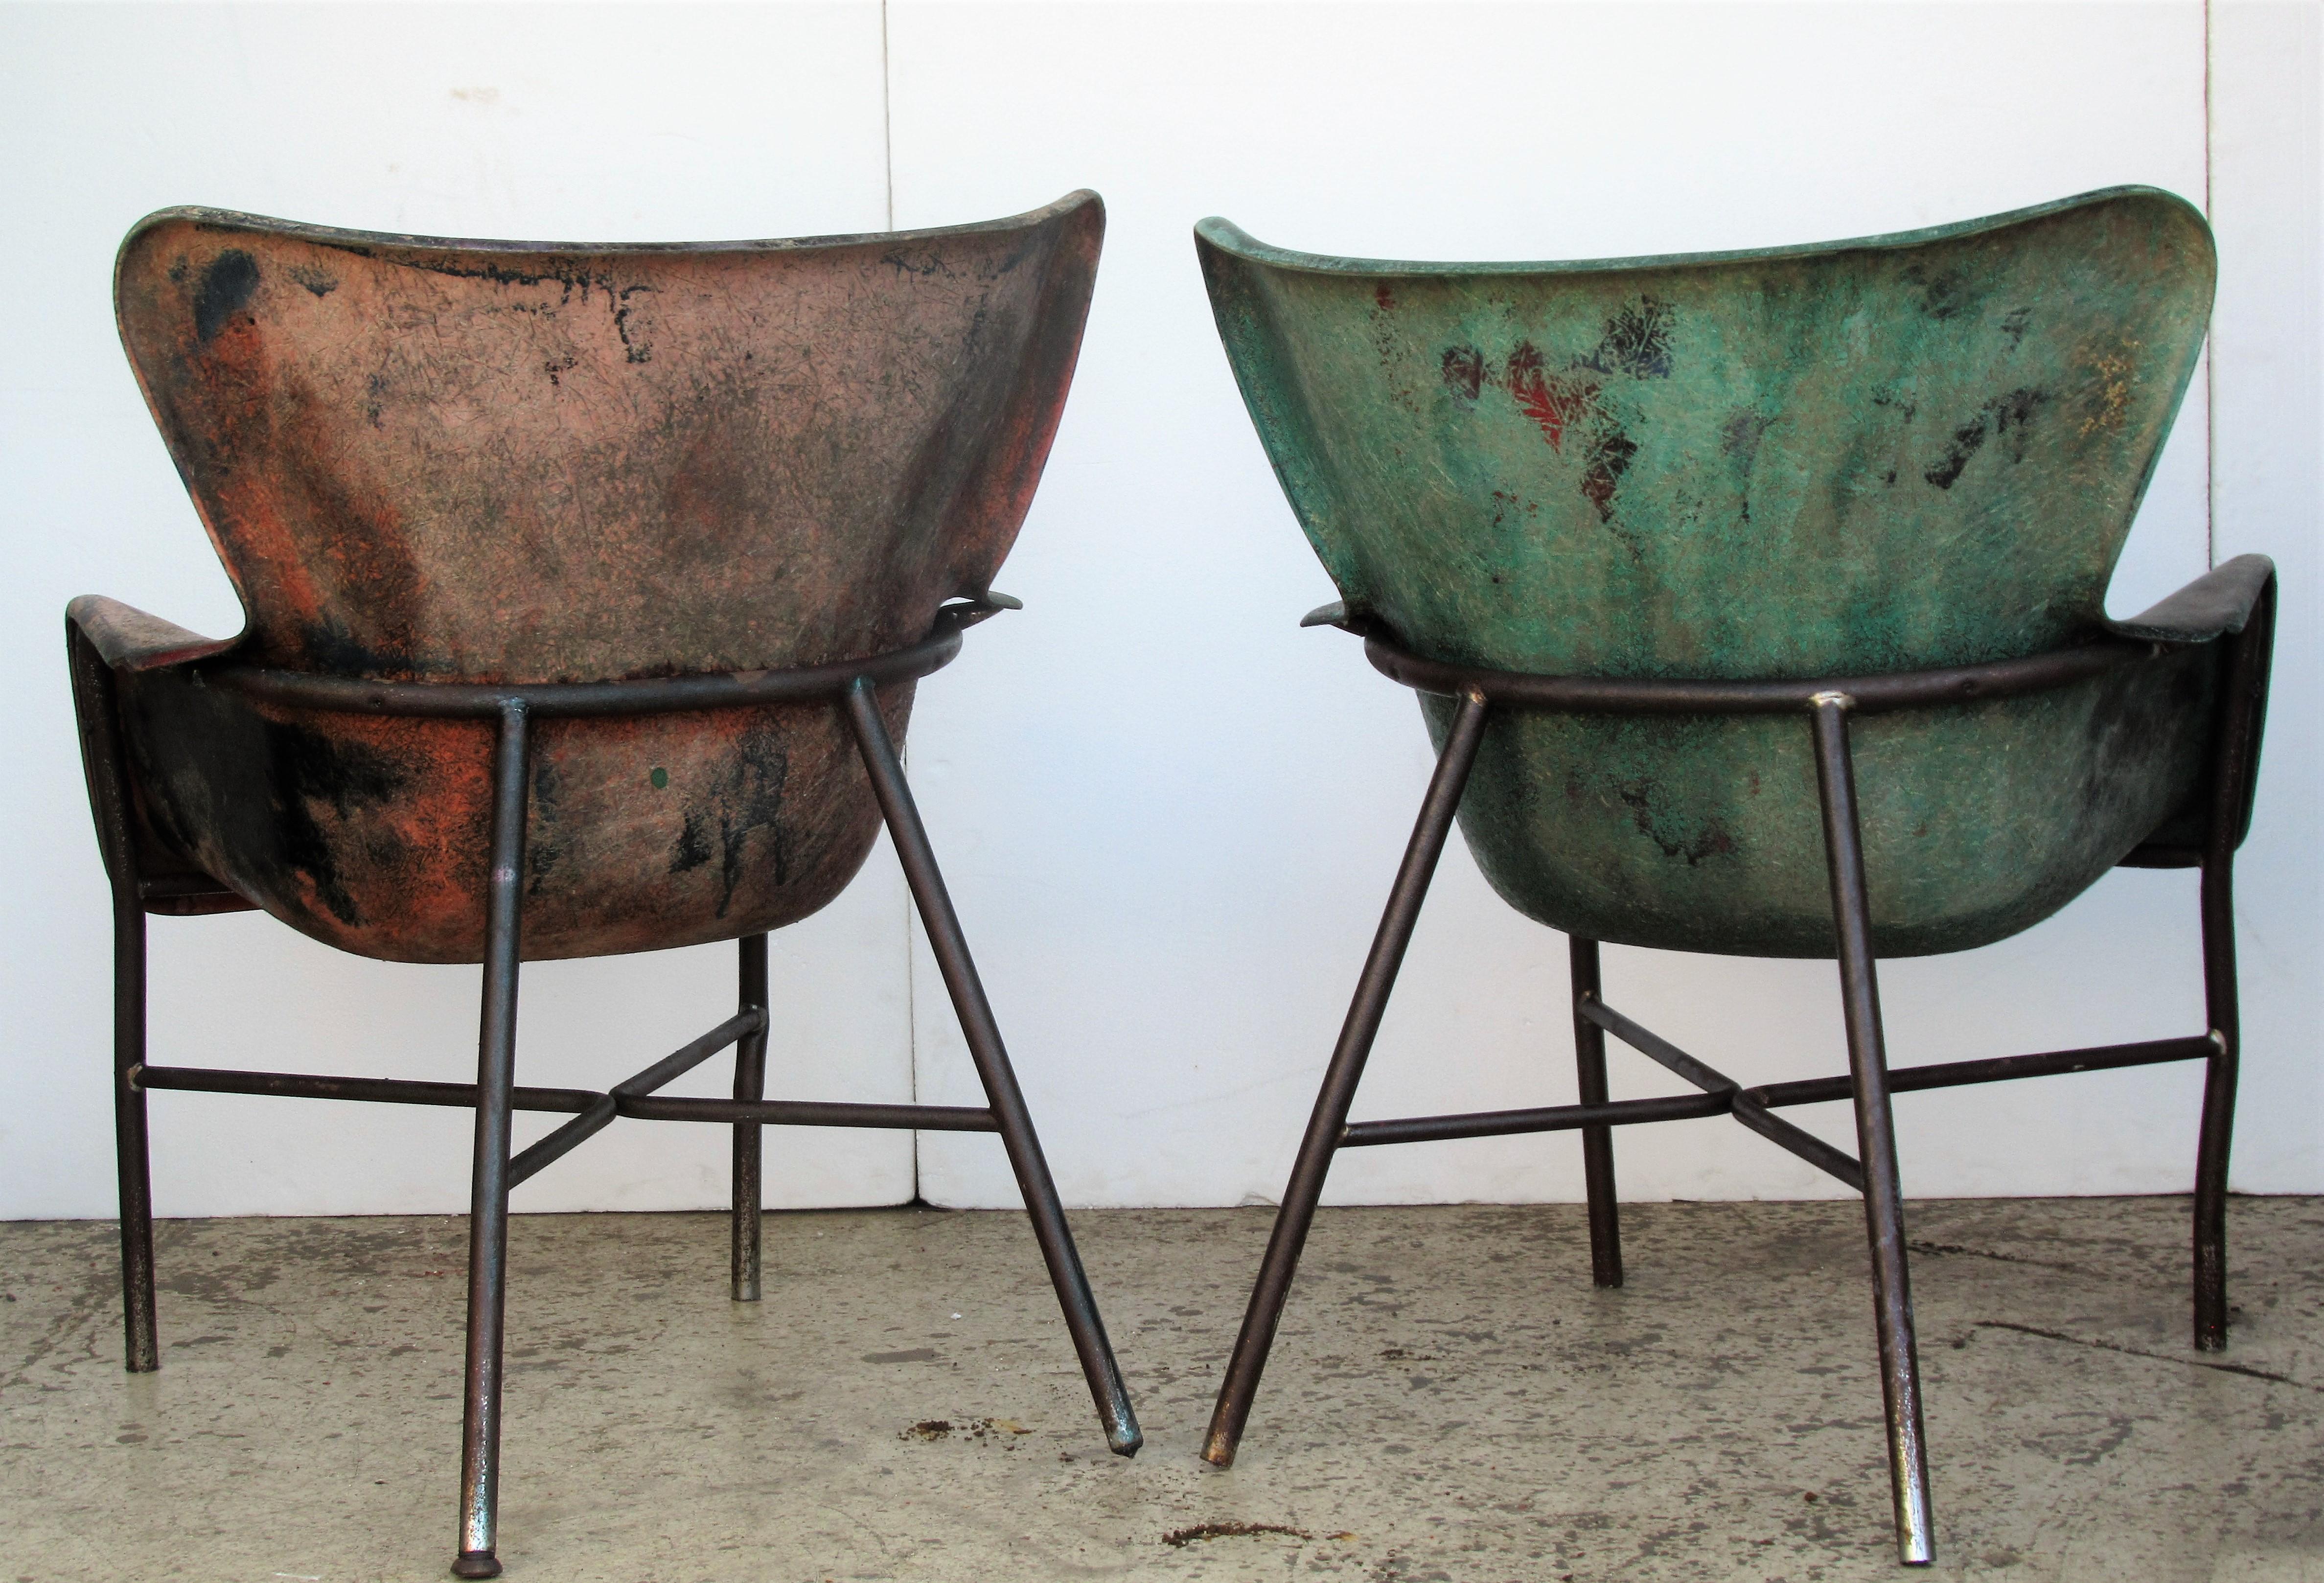 20th Century Lawrence Peabody Fiberglass Wing Chairs in Brilliant Worn Old Painted Surface